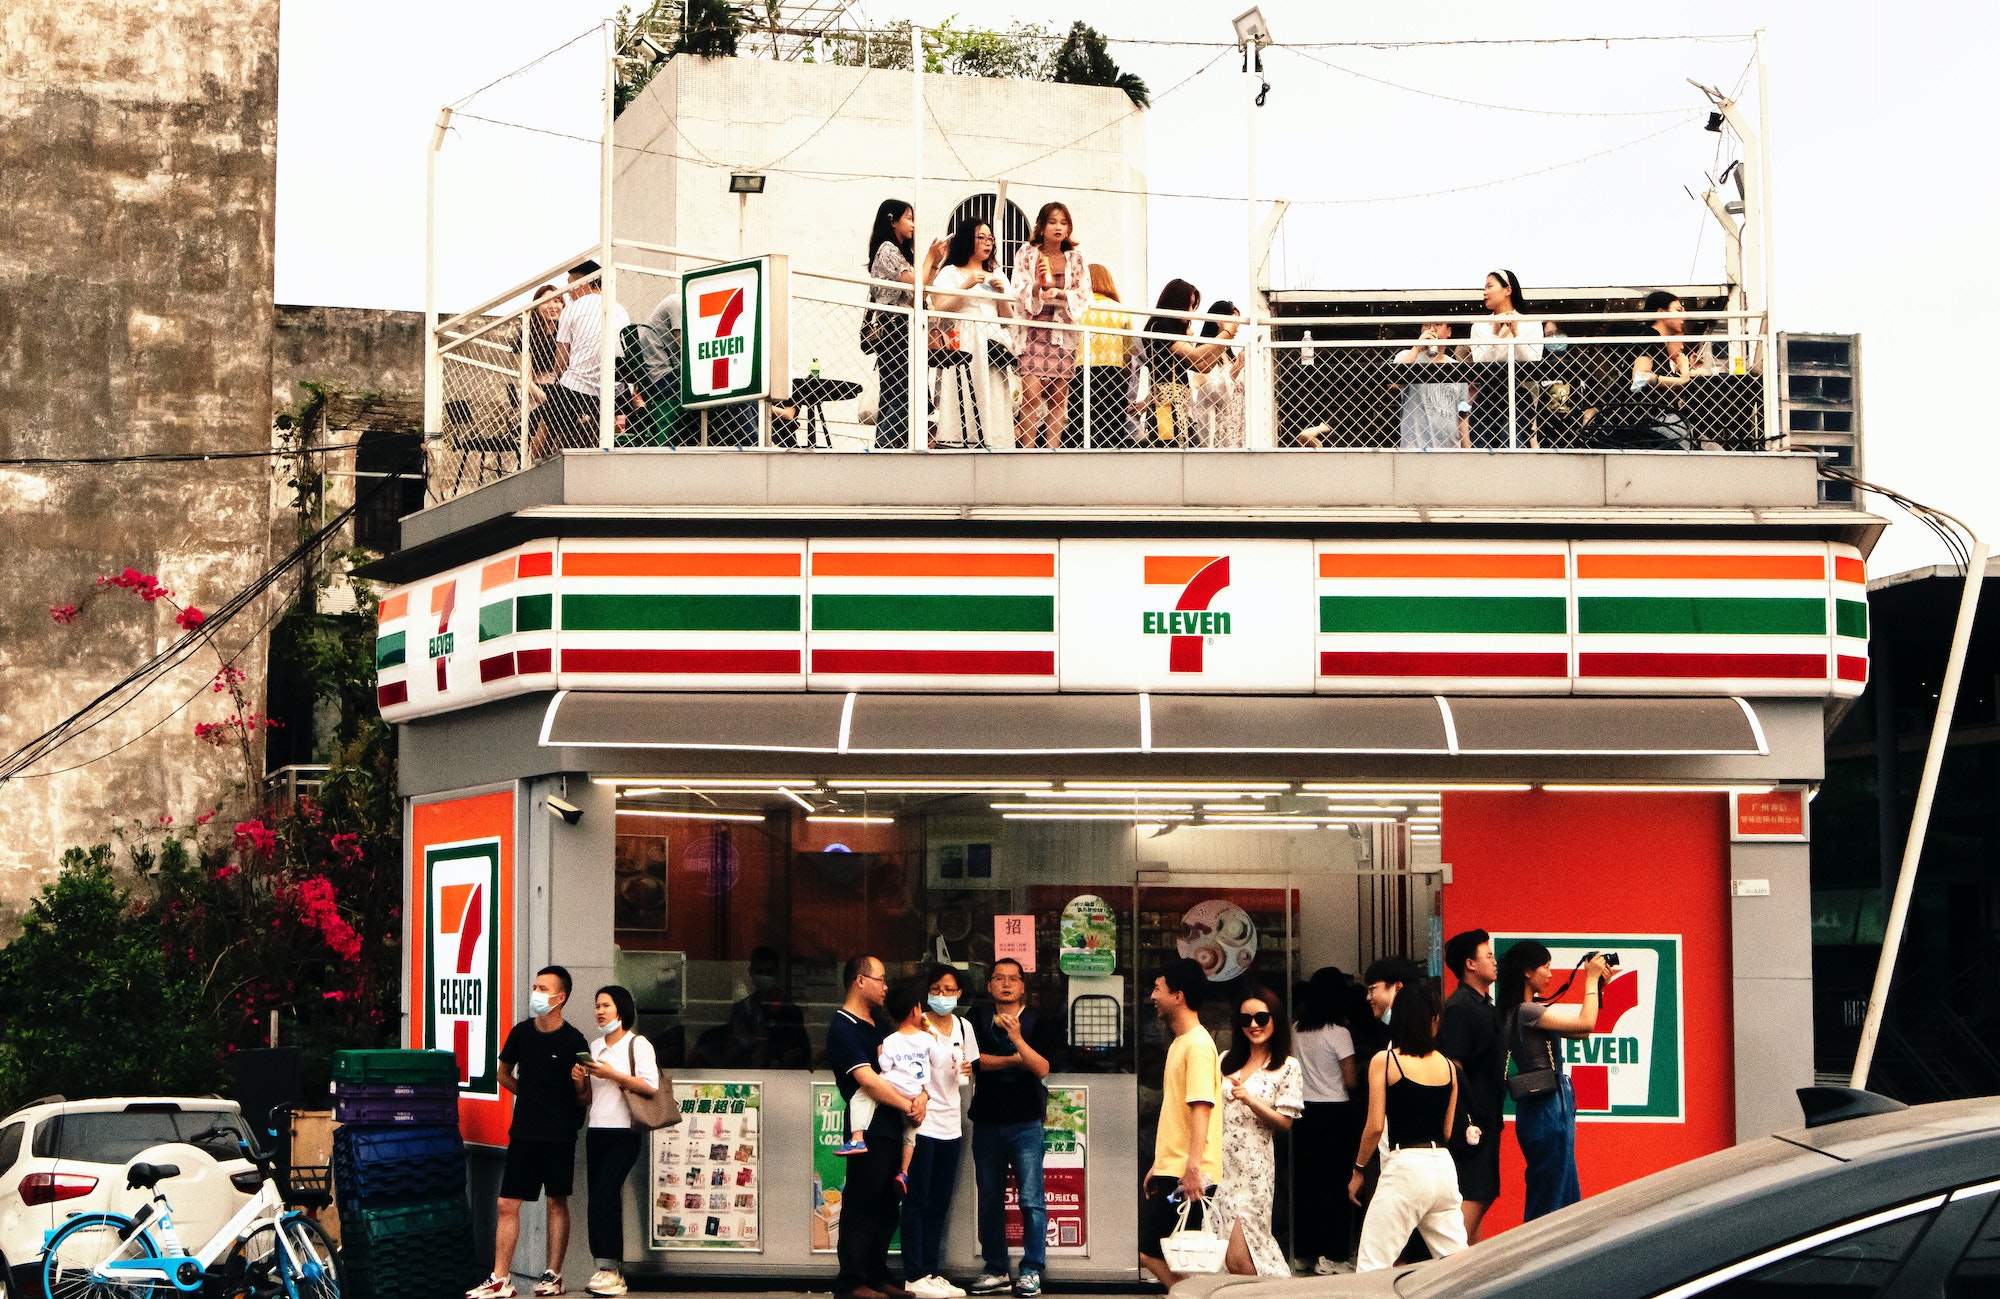 There are about 5,000 7-Eleven convenience stores worldwide